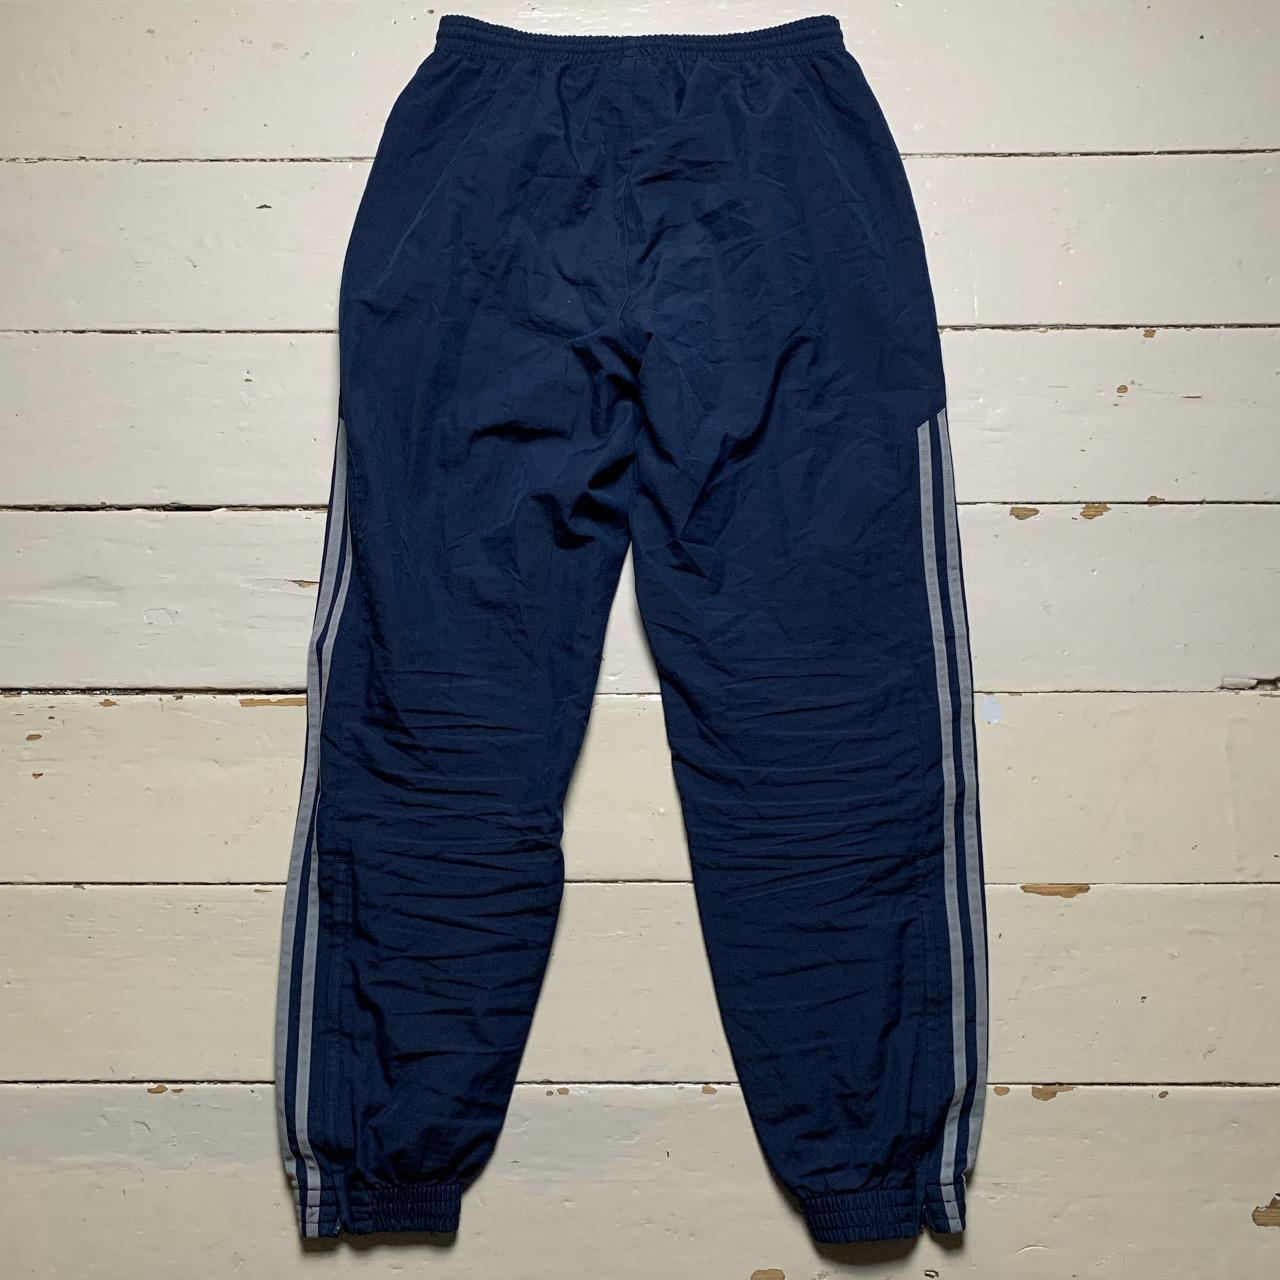 Adidas Baggy Shell Bottoms Navy and Grey Stripes